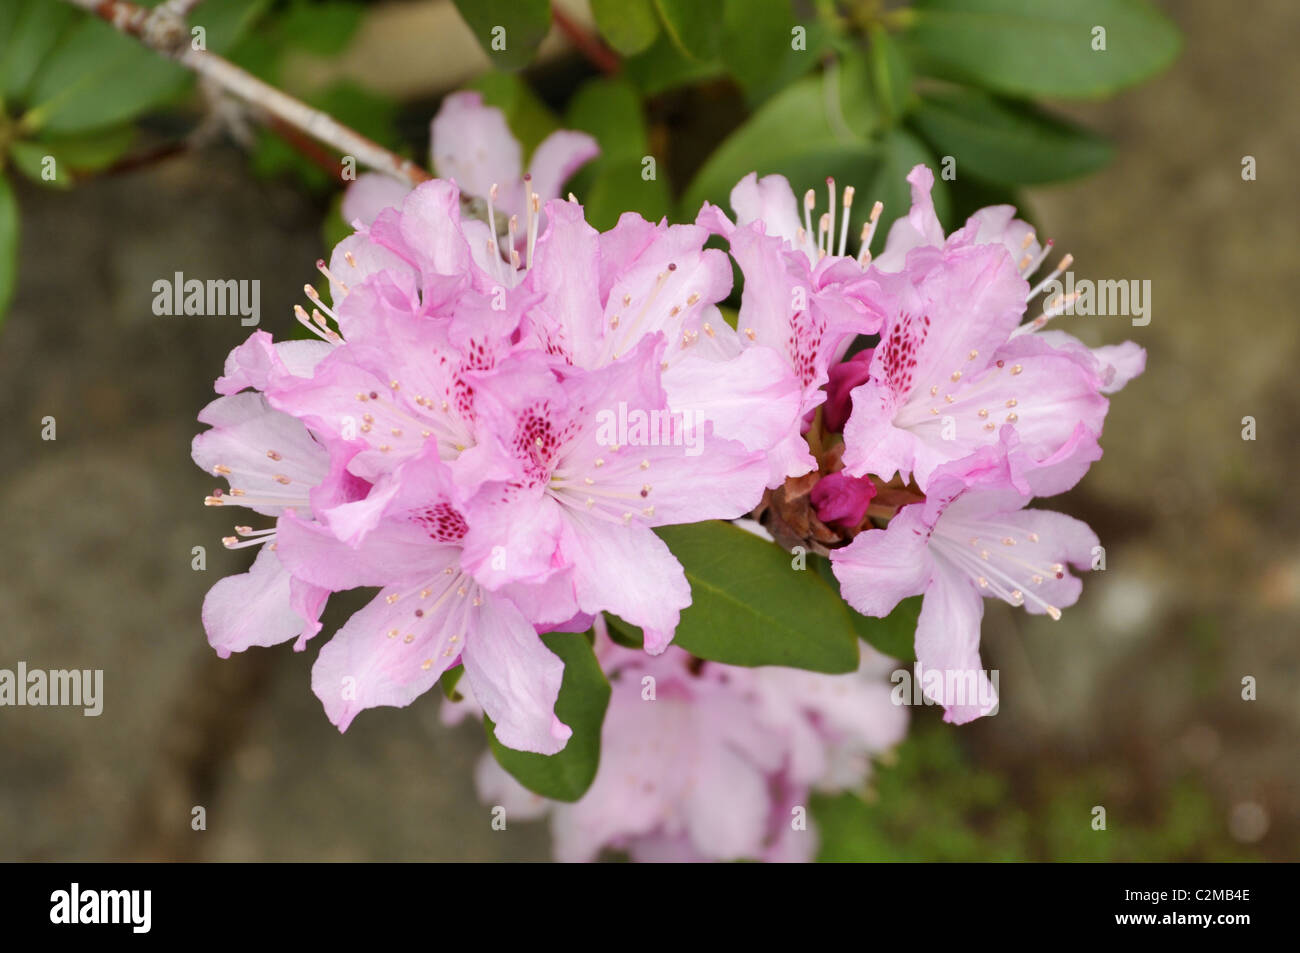 Rhododendron in bloom. Stock Photo